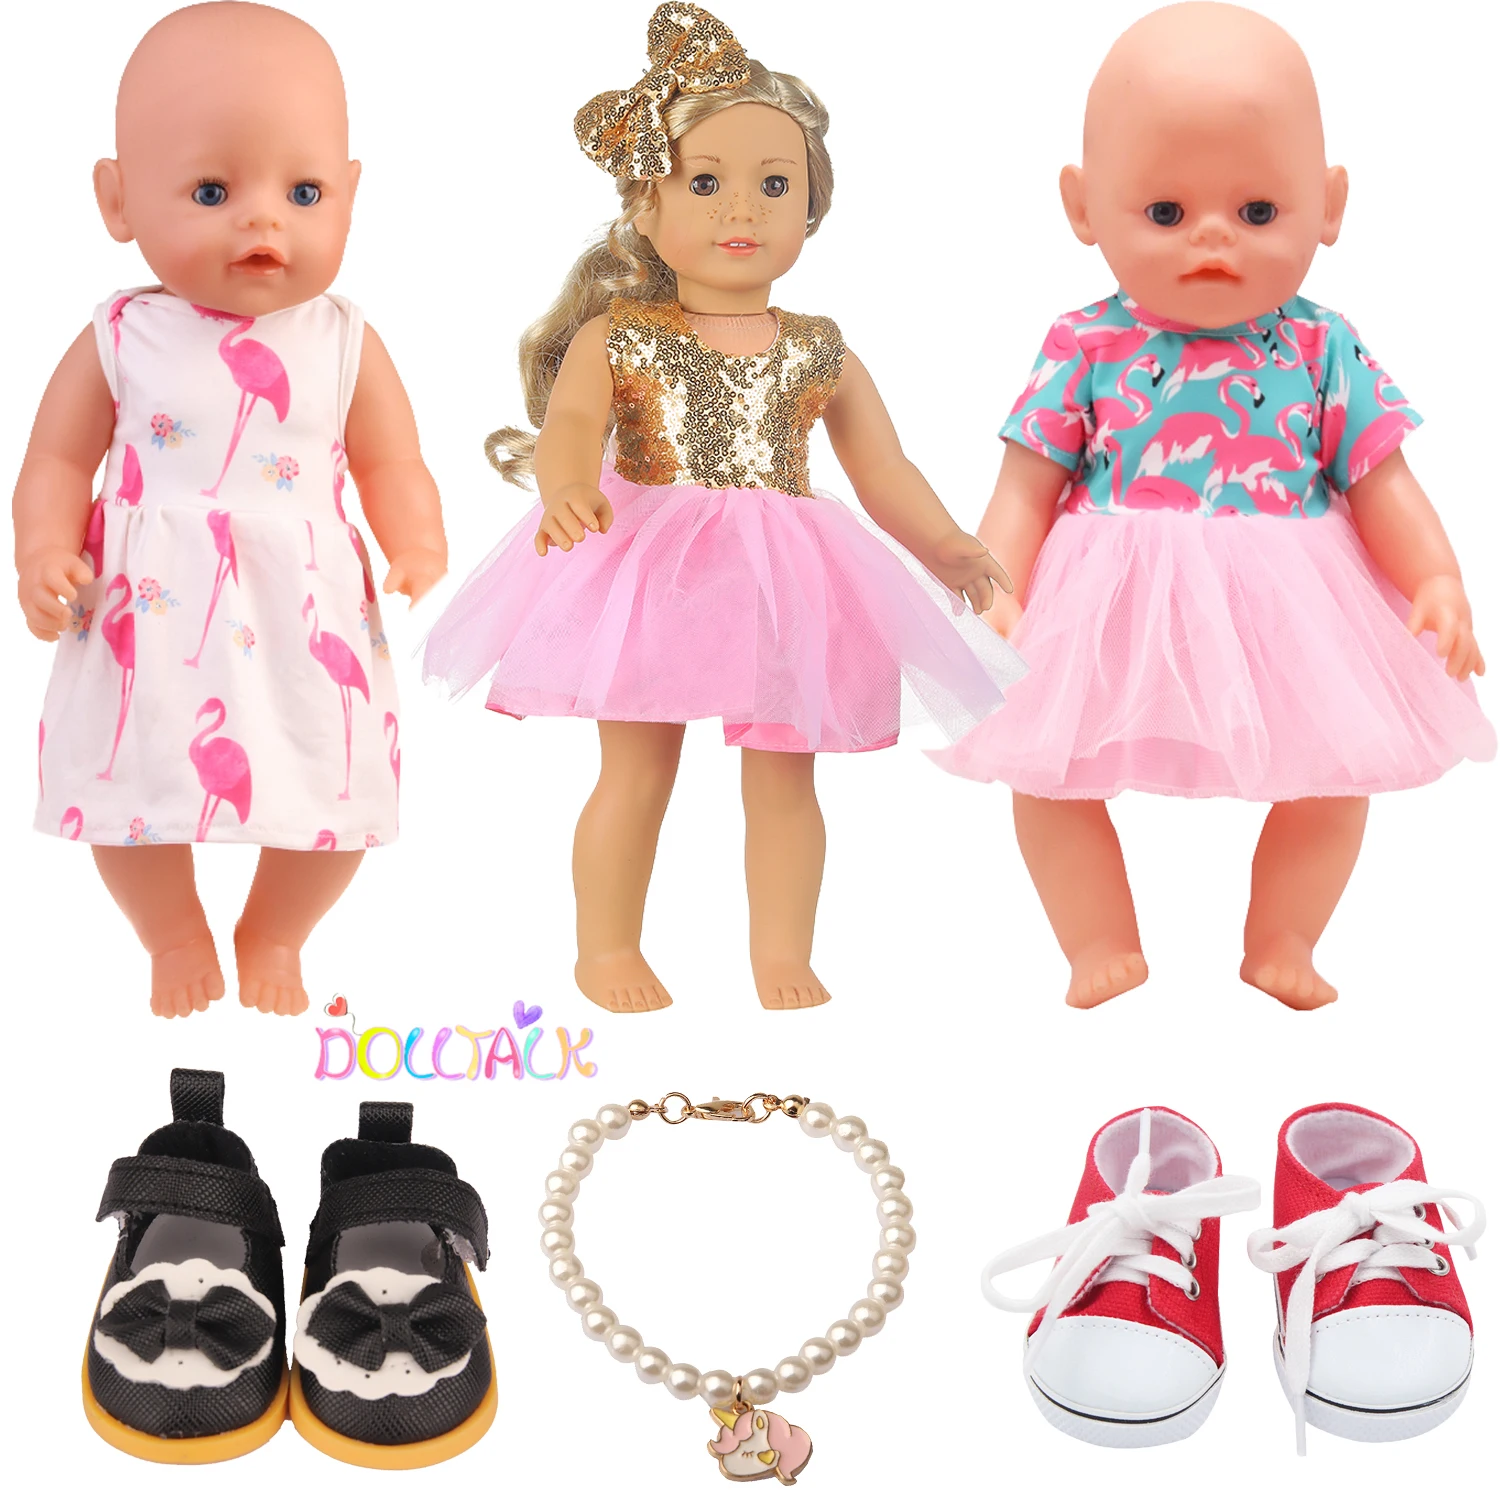 Doll Clothes Set 3 Dress+2 Shoes+1 Accessories For American 18 Inch Girl Doll Princess Dress For 43cm New Born,DIY,OG,Doll Girl images - 6